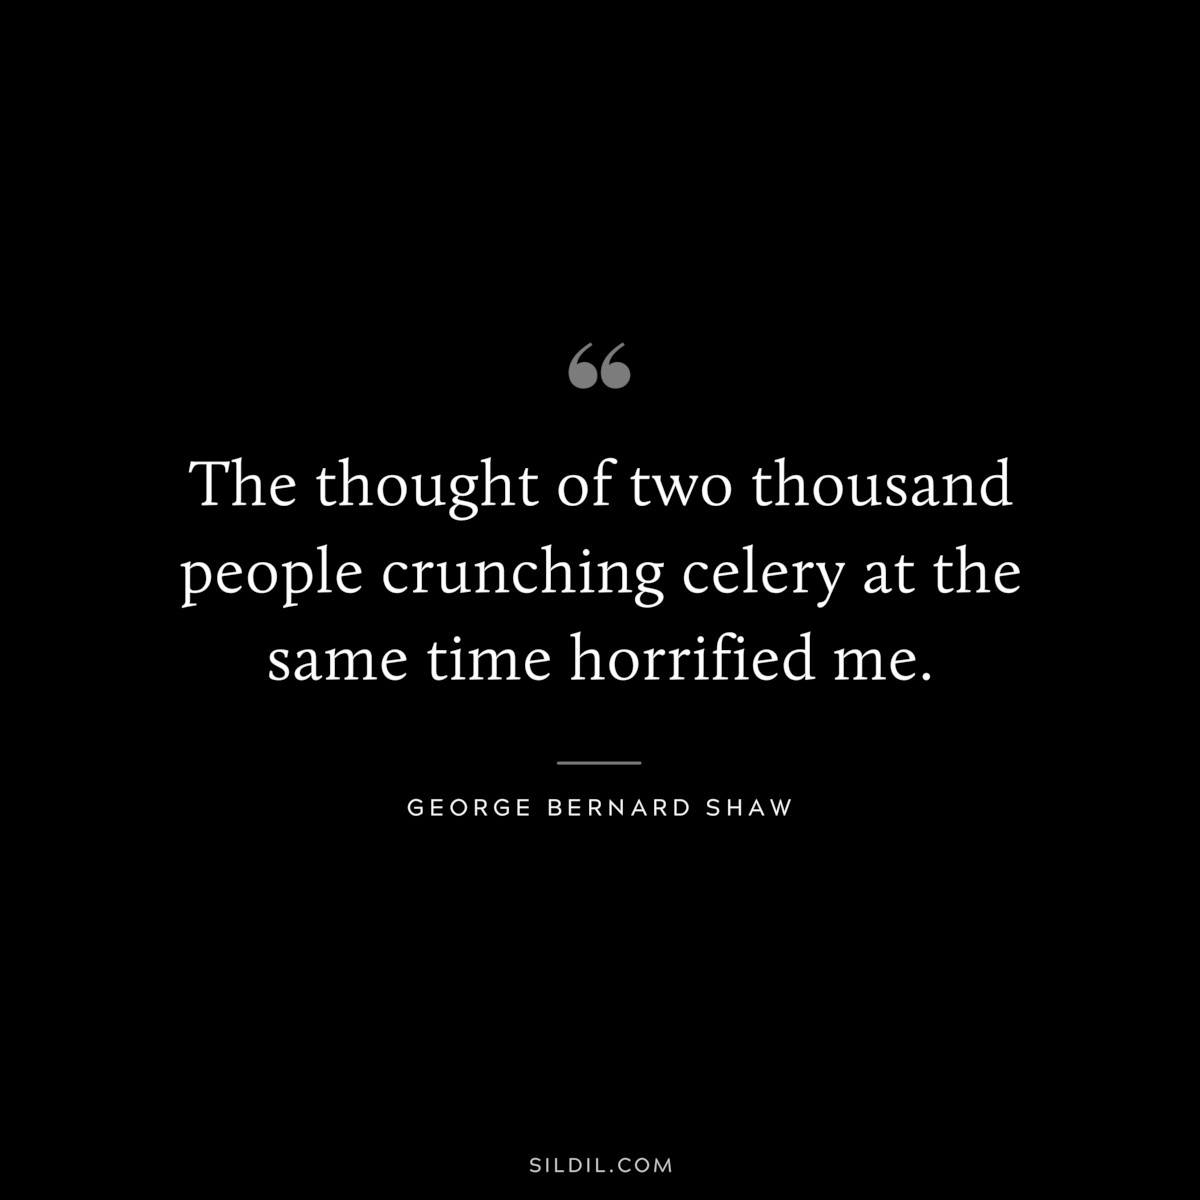 The thought of two thousand people crunching celery at the same time horrified me. ― George Bernard Shaw